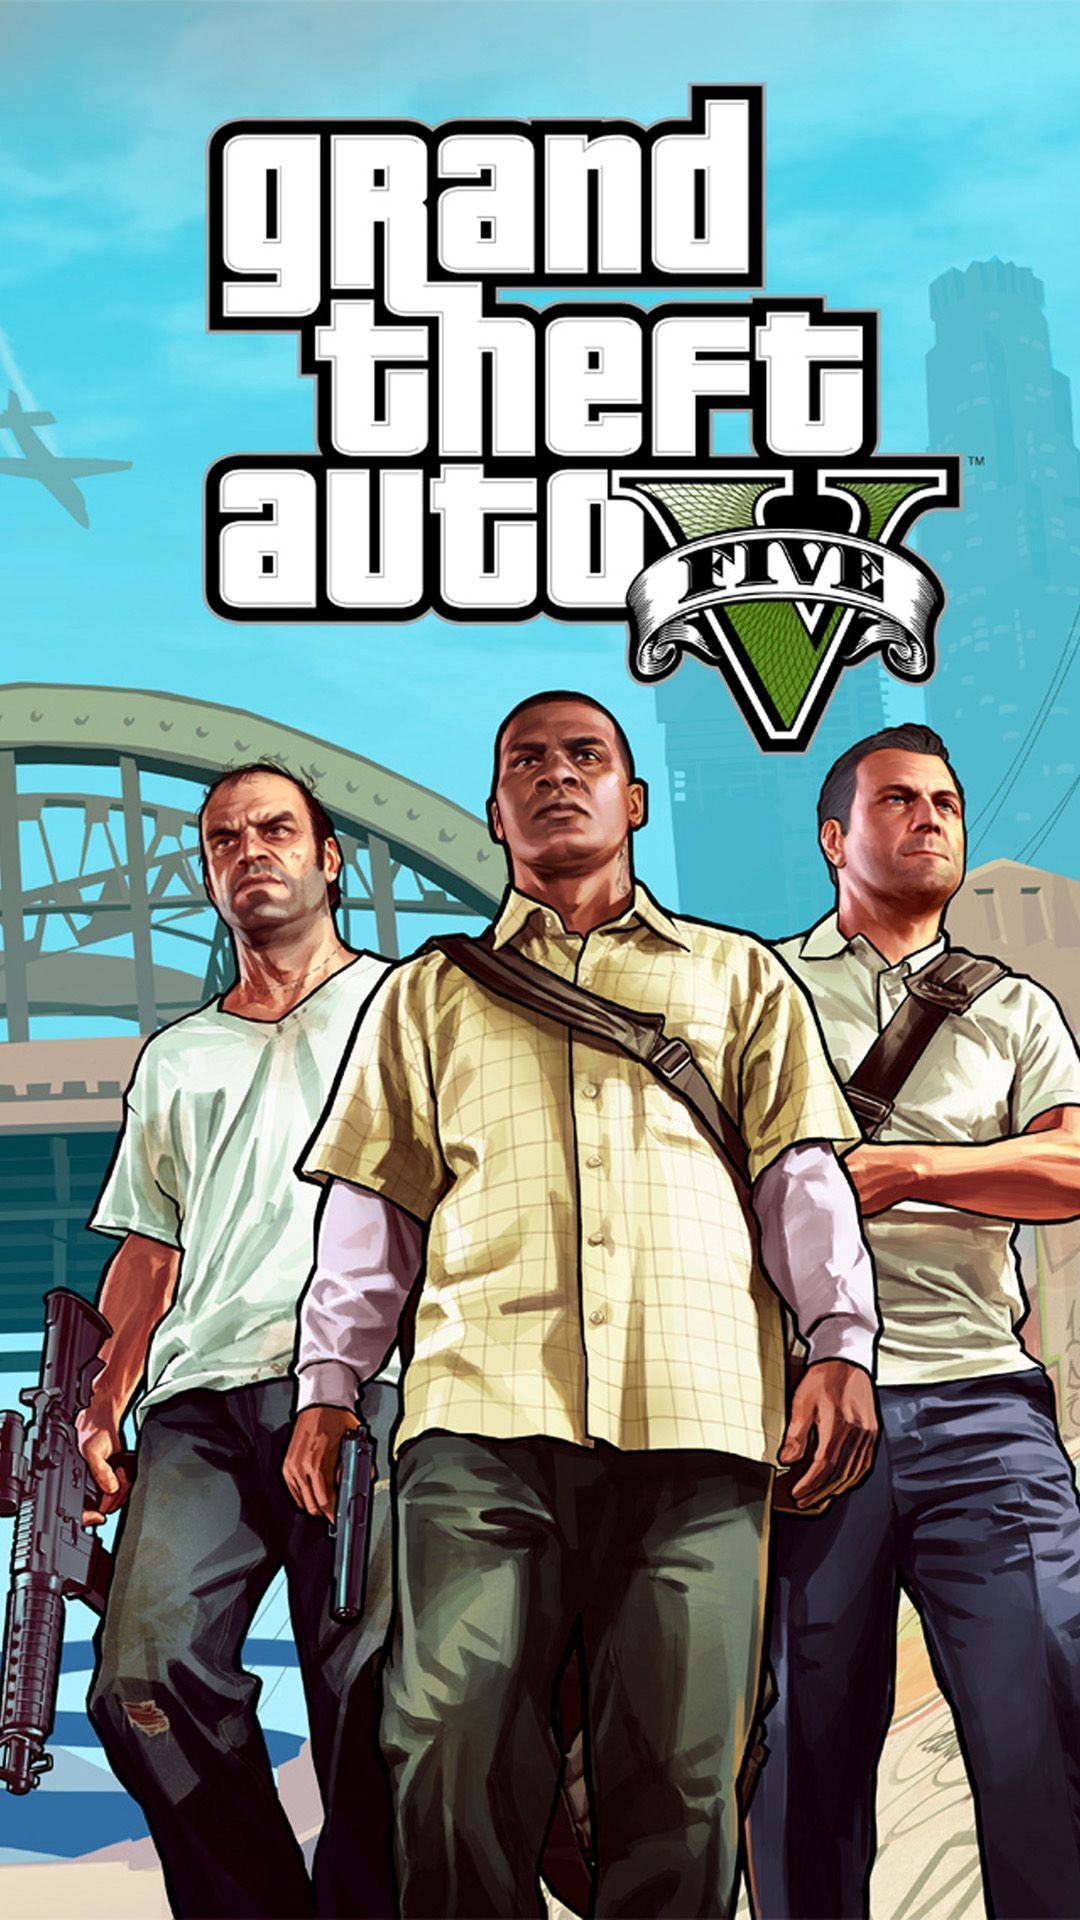 Grand Theft Auto, Best GTA 5 wallpapers, High-speed races, Urban chaos, 1080x1920 Full HD Phone